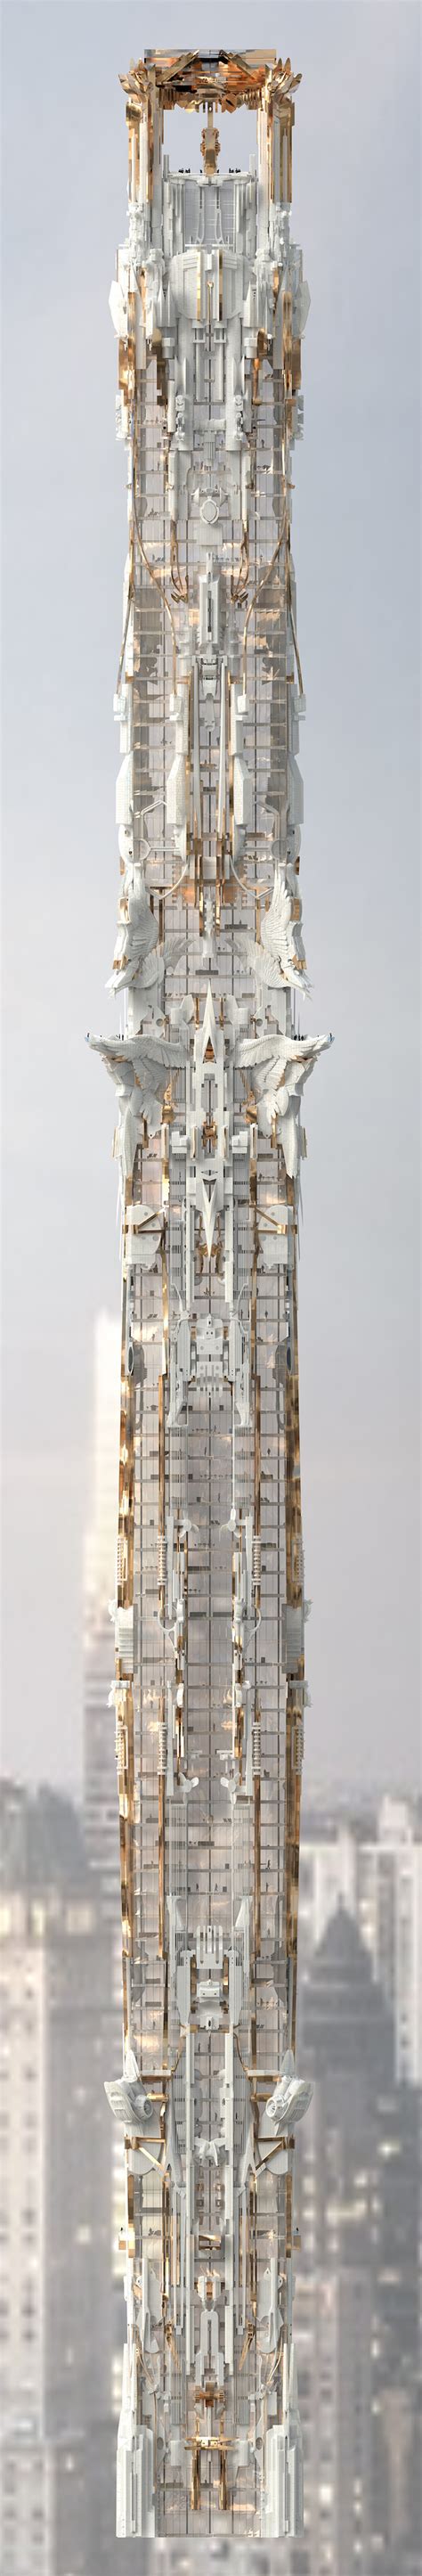 Helping to grow your business by providing high beaute mark designs is not affiliated with nor endorses any of the advertised companies. Architect Designs NYC Skyscraper Fit for a Khaleesi - Creators